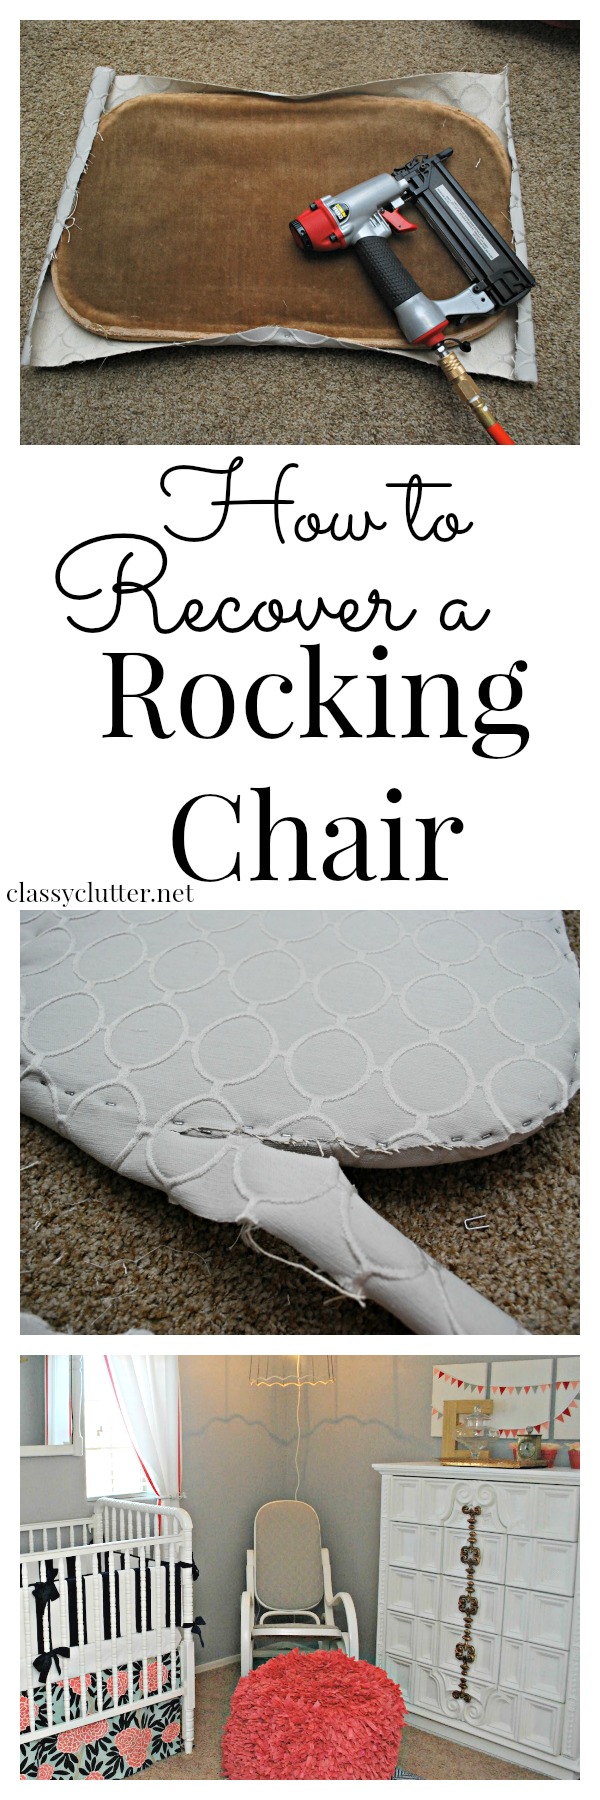 How to recover a rocking chair